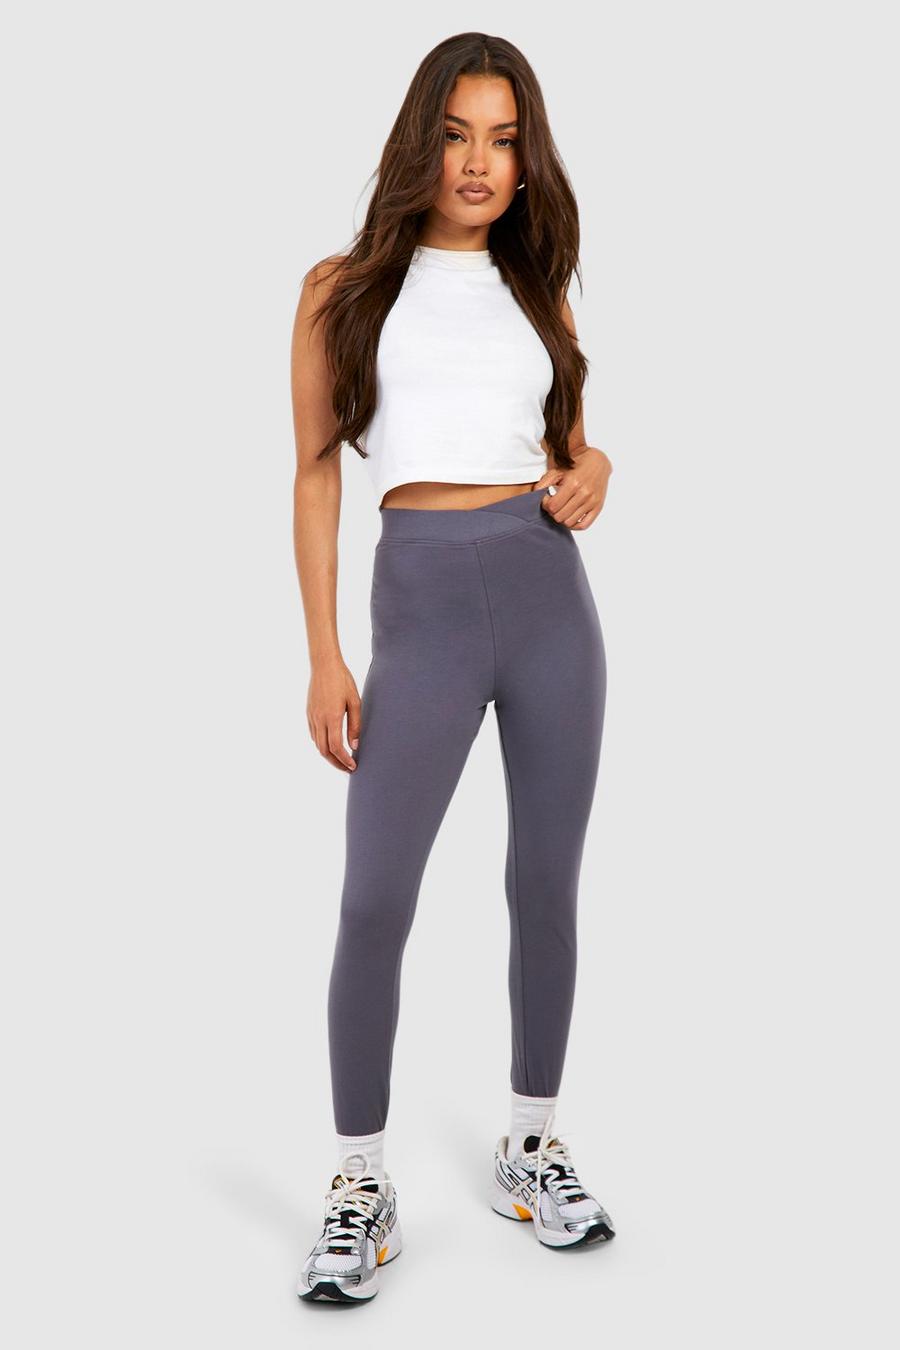 Cotton Jersey Knit Wrap High Waisted Leggings